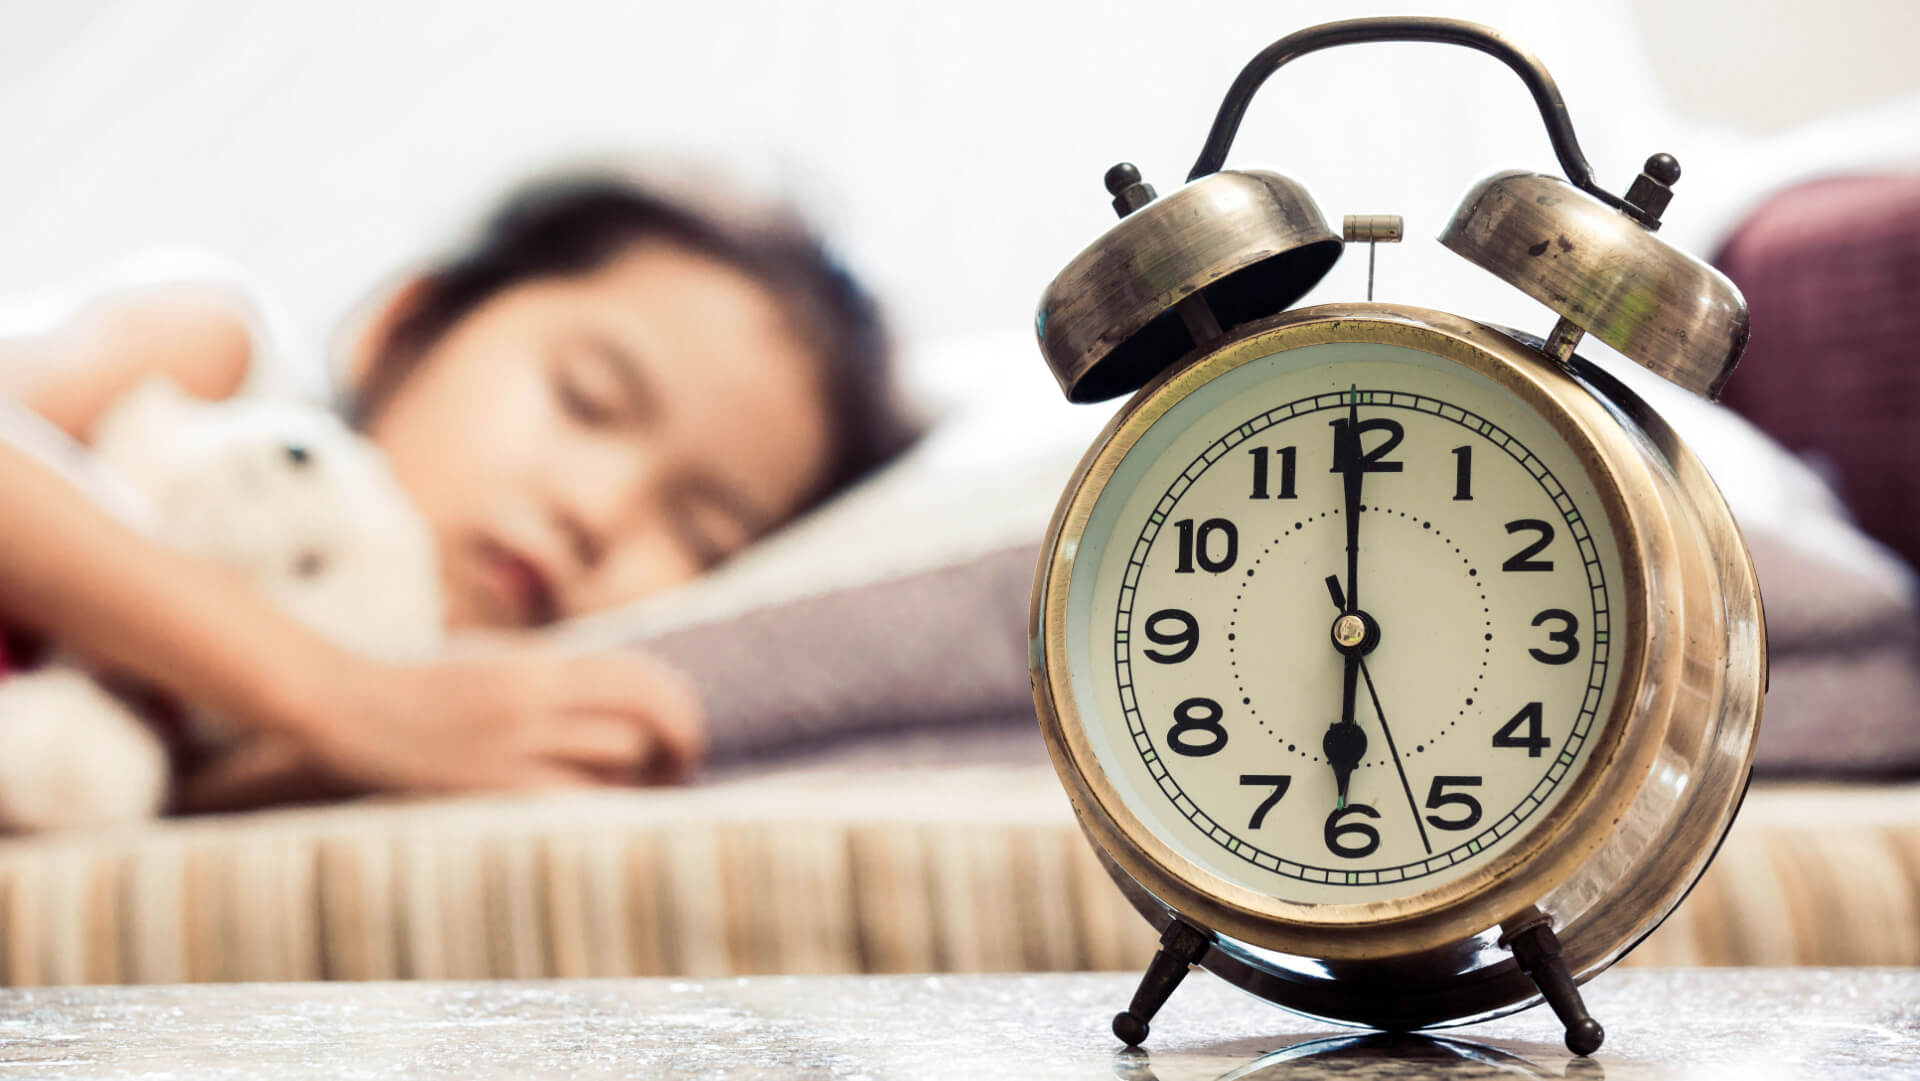 When we fall back an hour for daylight savings, the extra hour gained in the morning can often lead to overtired, cranky kids in the afternoon or evening. Follow these five tips from Dharmesh Suratwala, MD, medical director, Atrium Health's Levine Children's Sleep Medicine, to help get your family back on schedule. 